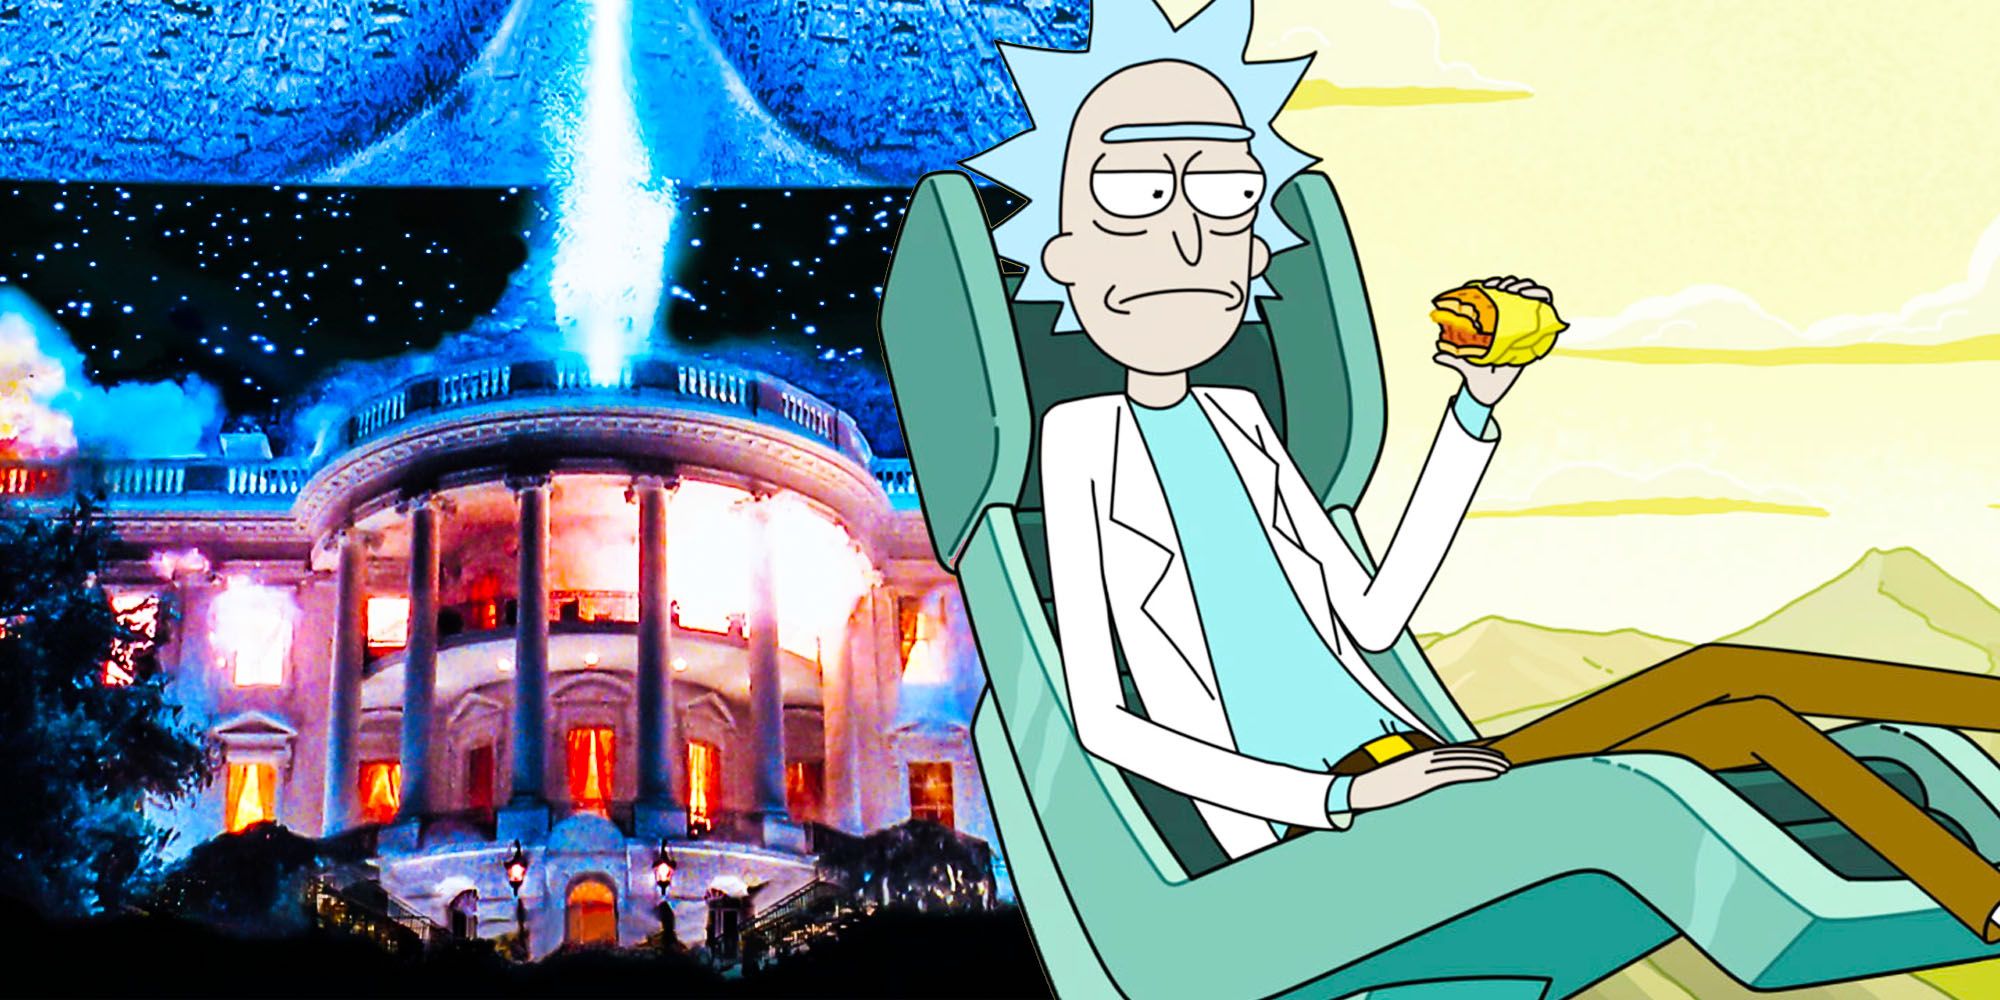 Rick and morty season 5 mocked independence day